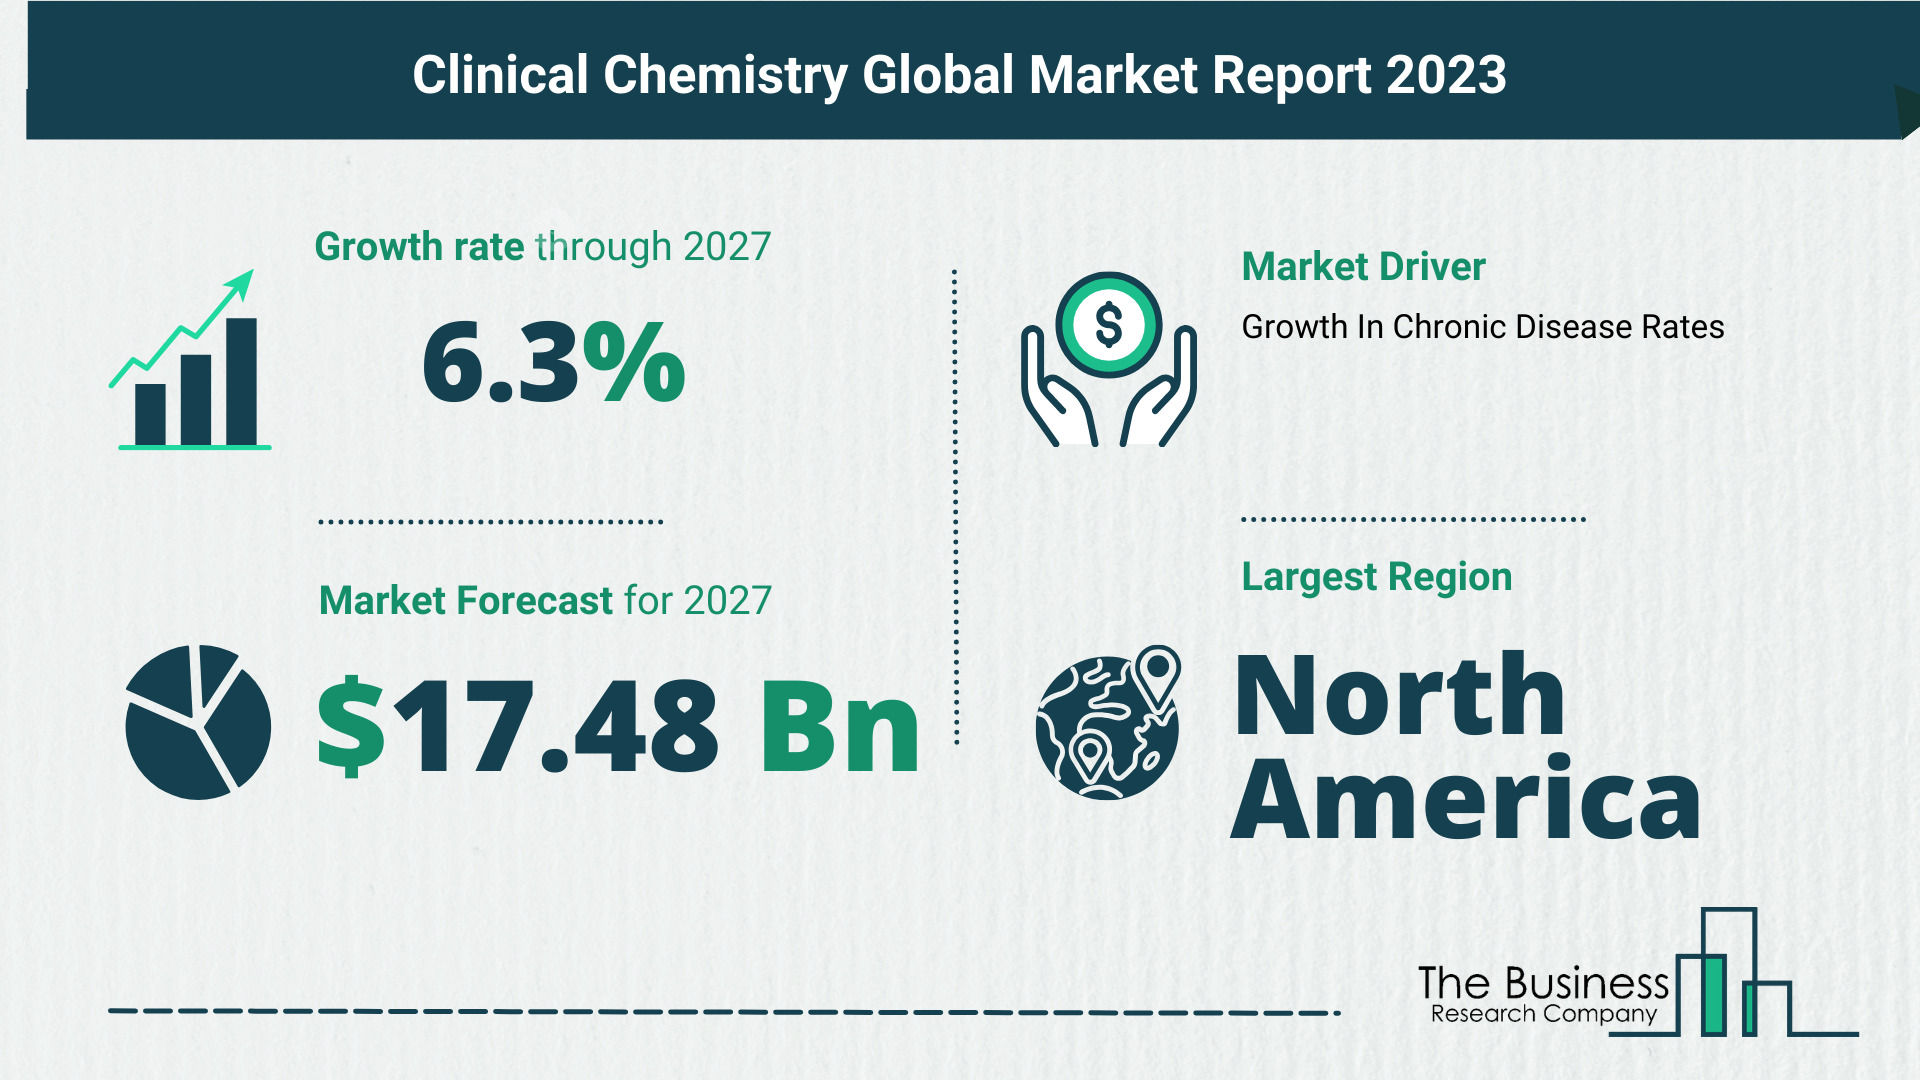 Global Clinical Chemistry Market